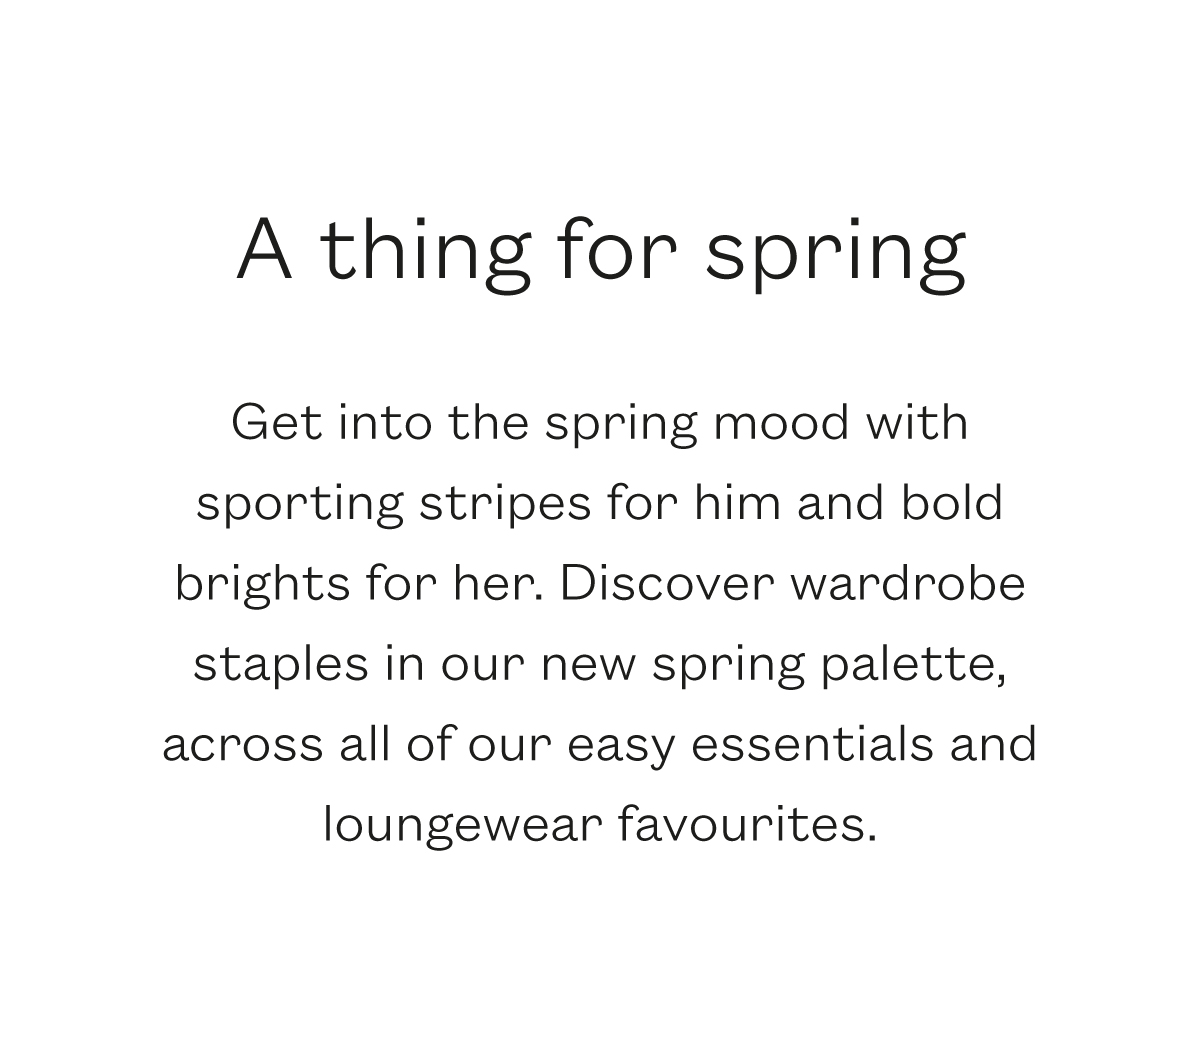 A thing for Spring  Get into the spring mood with sporting stripes for him and bold brights for her. Discover wardrobe staples in our new spring palette, across all of our easy essentials and loungewear favourites. 